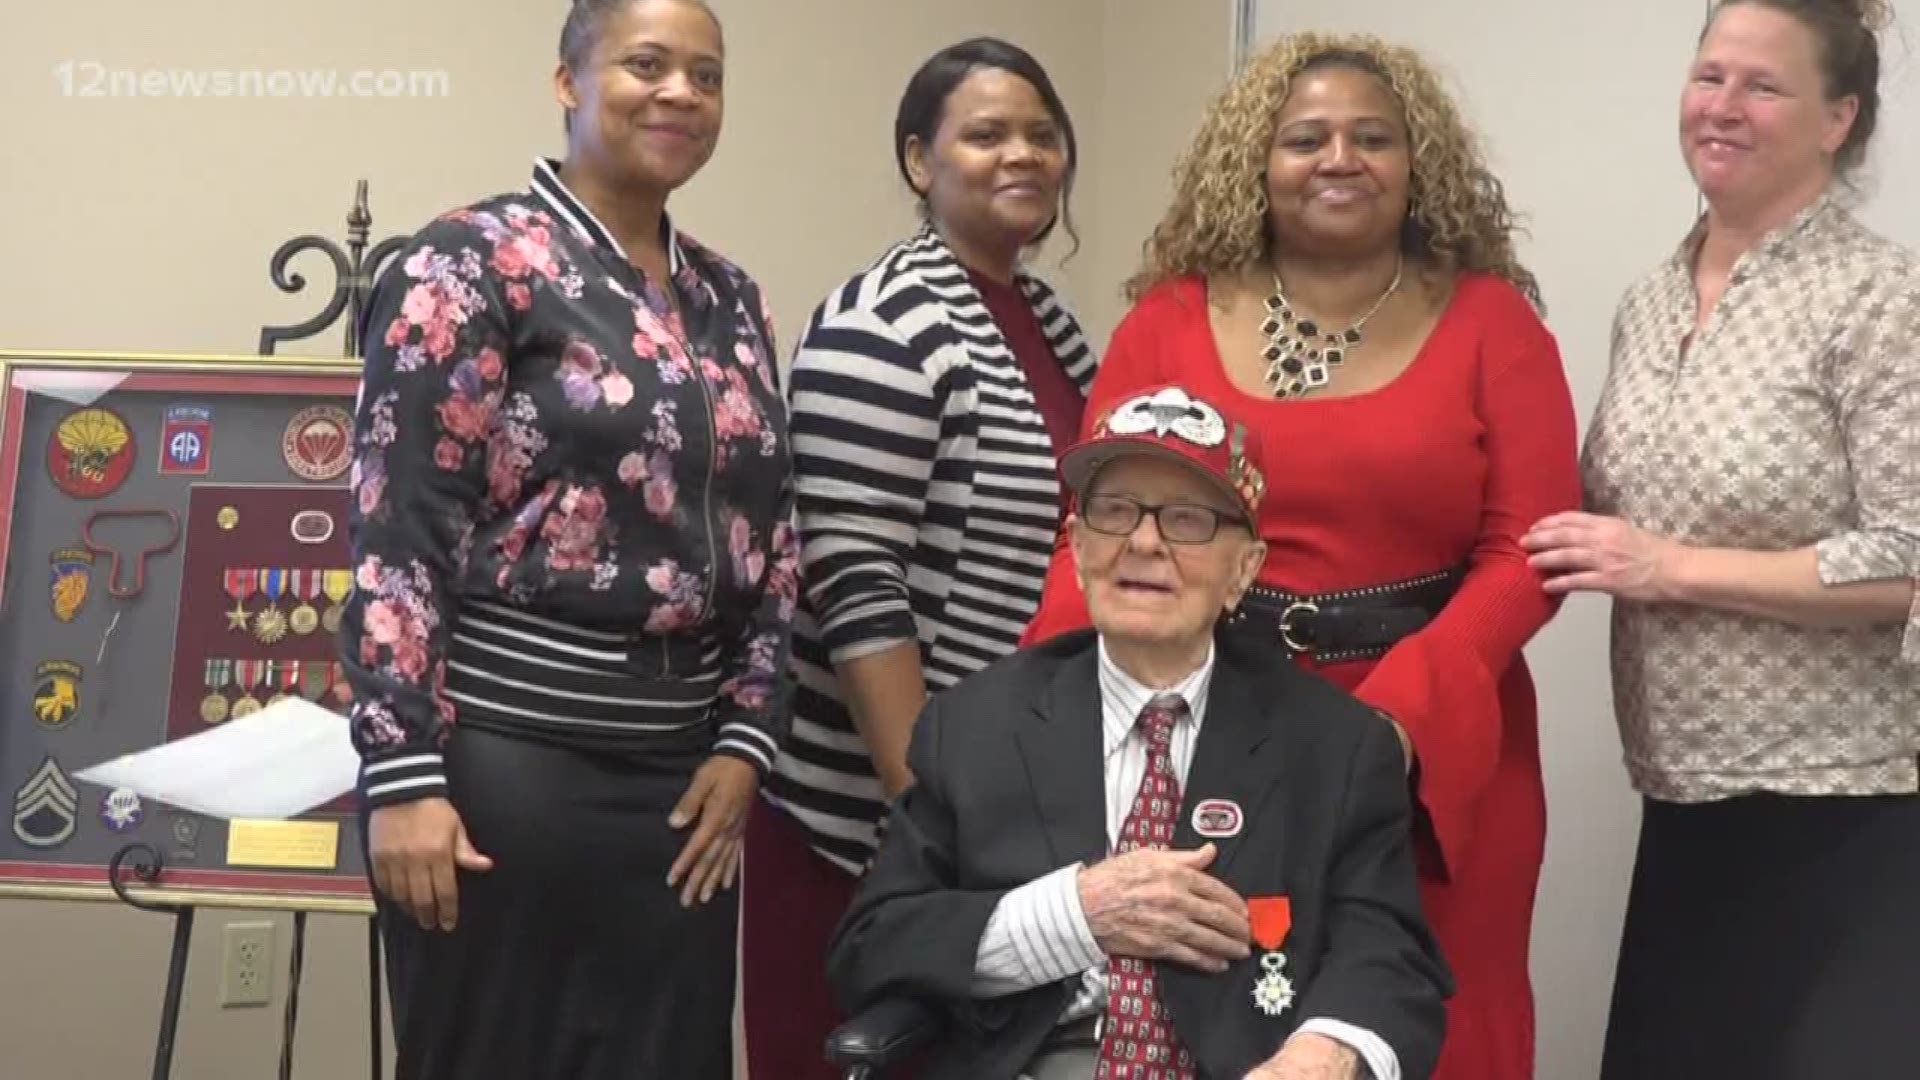 Fred E. Brown was a paratrooper in World War II and contributed to the liberation of France in 1944. Reas more at 12NewsNow.com